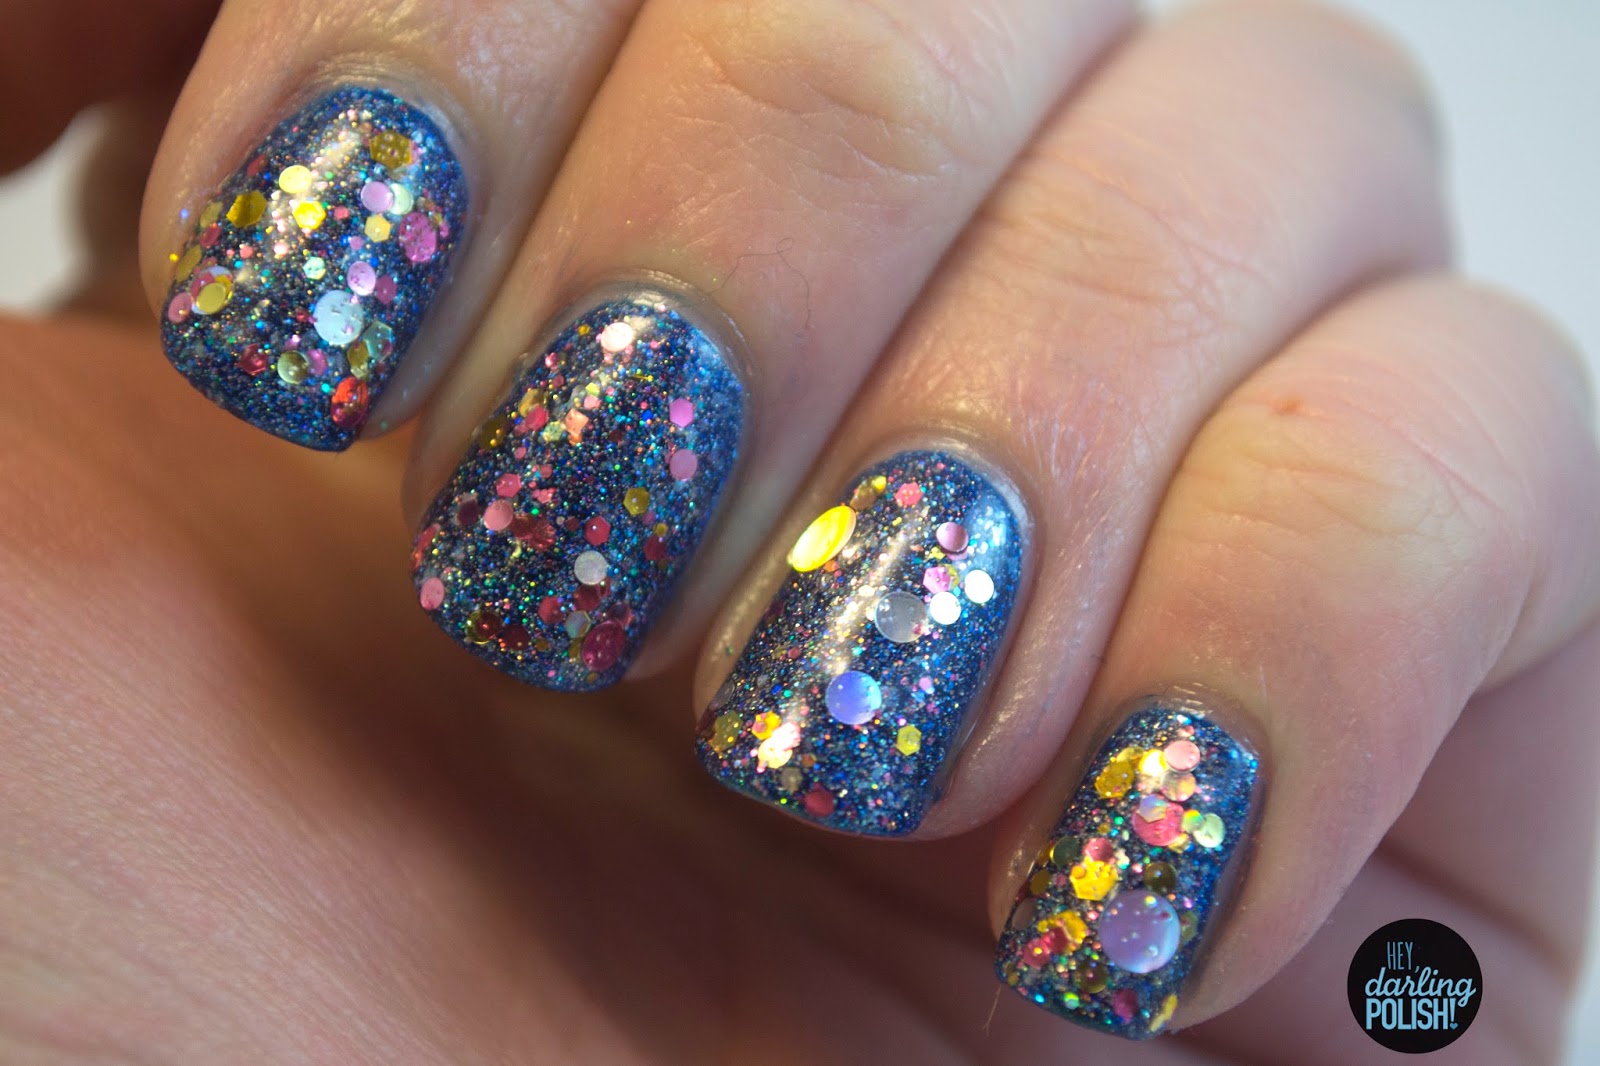 Hey, Darling Polish!: New Year's Eve Nails: All The Sparklies